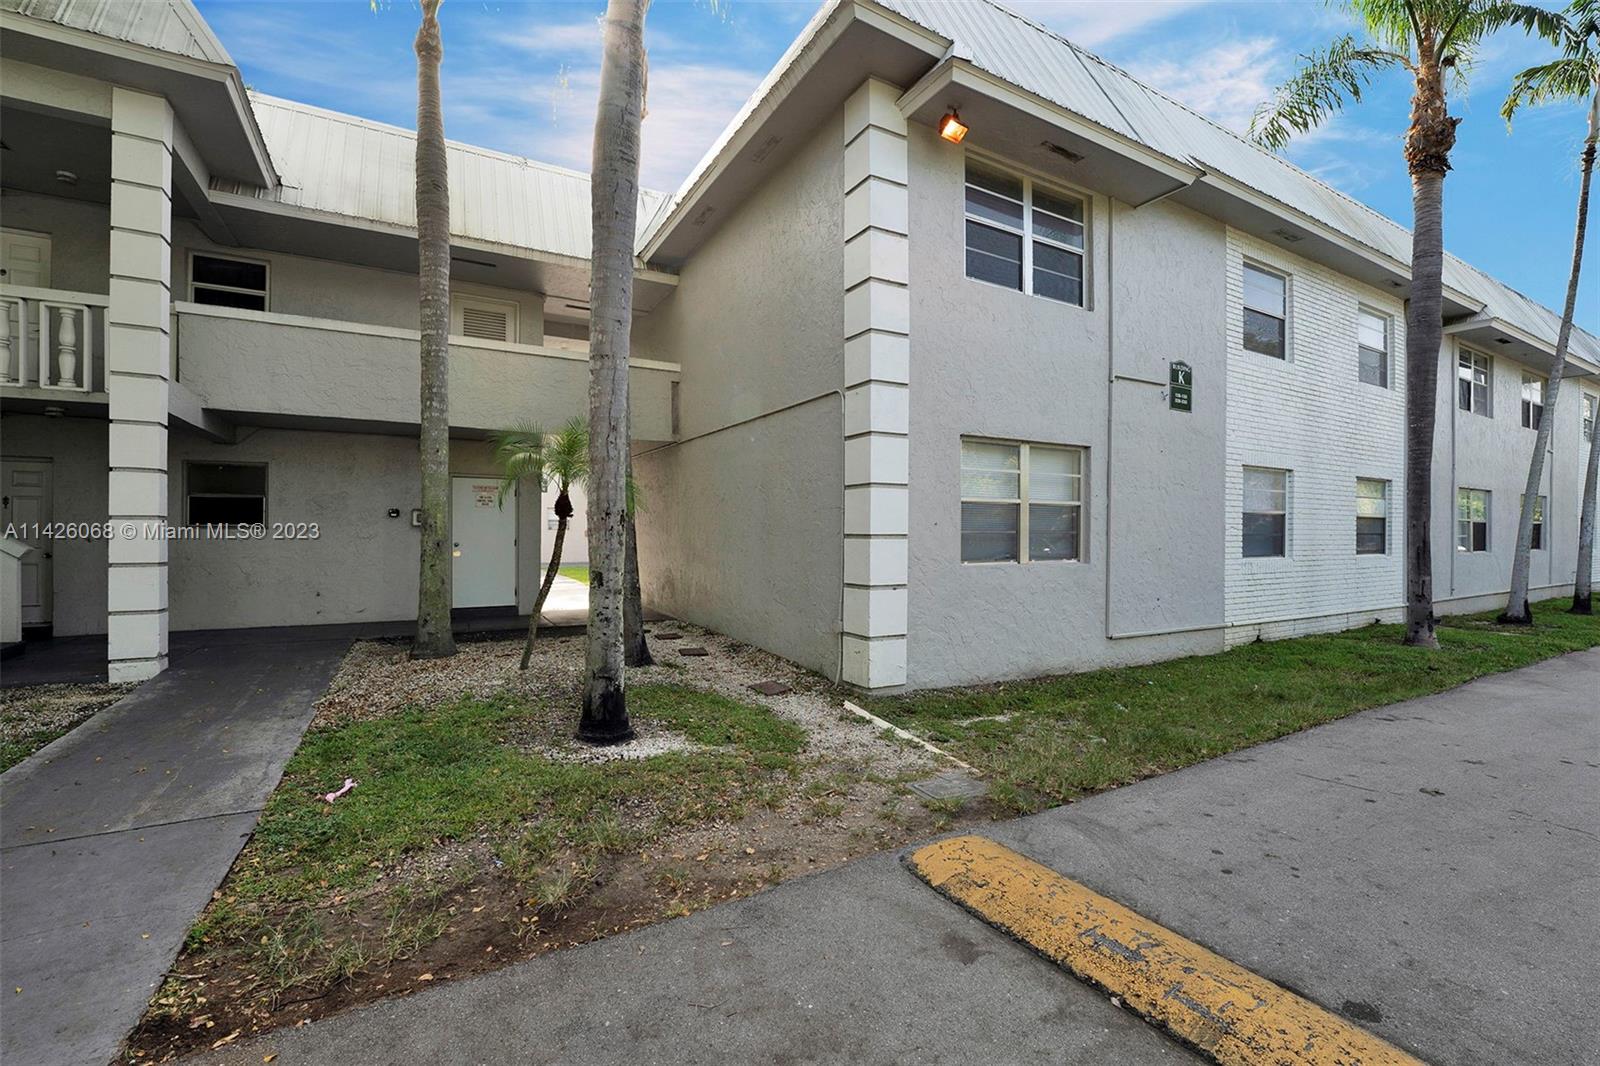 Excellent location in Palmetto Bay with excellent schools. Walking distance to plaza's, US1, Car dealerships, supermarkets. 2/1 fully renovated with new kitchen,blinds, bathroom, appliances, and AC. Ready for a tenant. Two assigned parking spots. NO Washer and Dryer in Unit. PLEASE ASK YOUR REALTOR TO ALLOW SHOWING.LANDLORD REQUIRES RENTER'S INSURANCE.